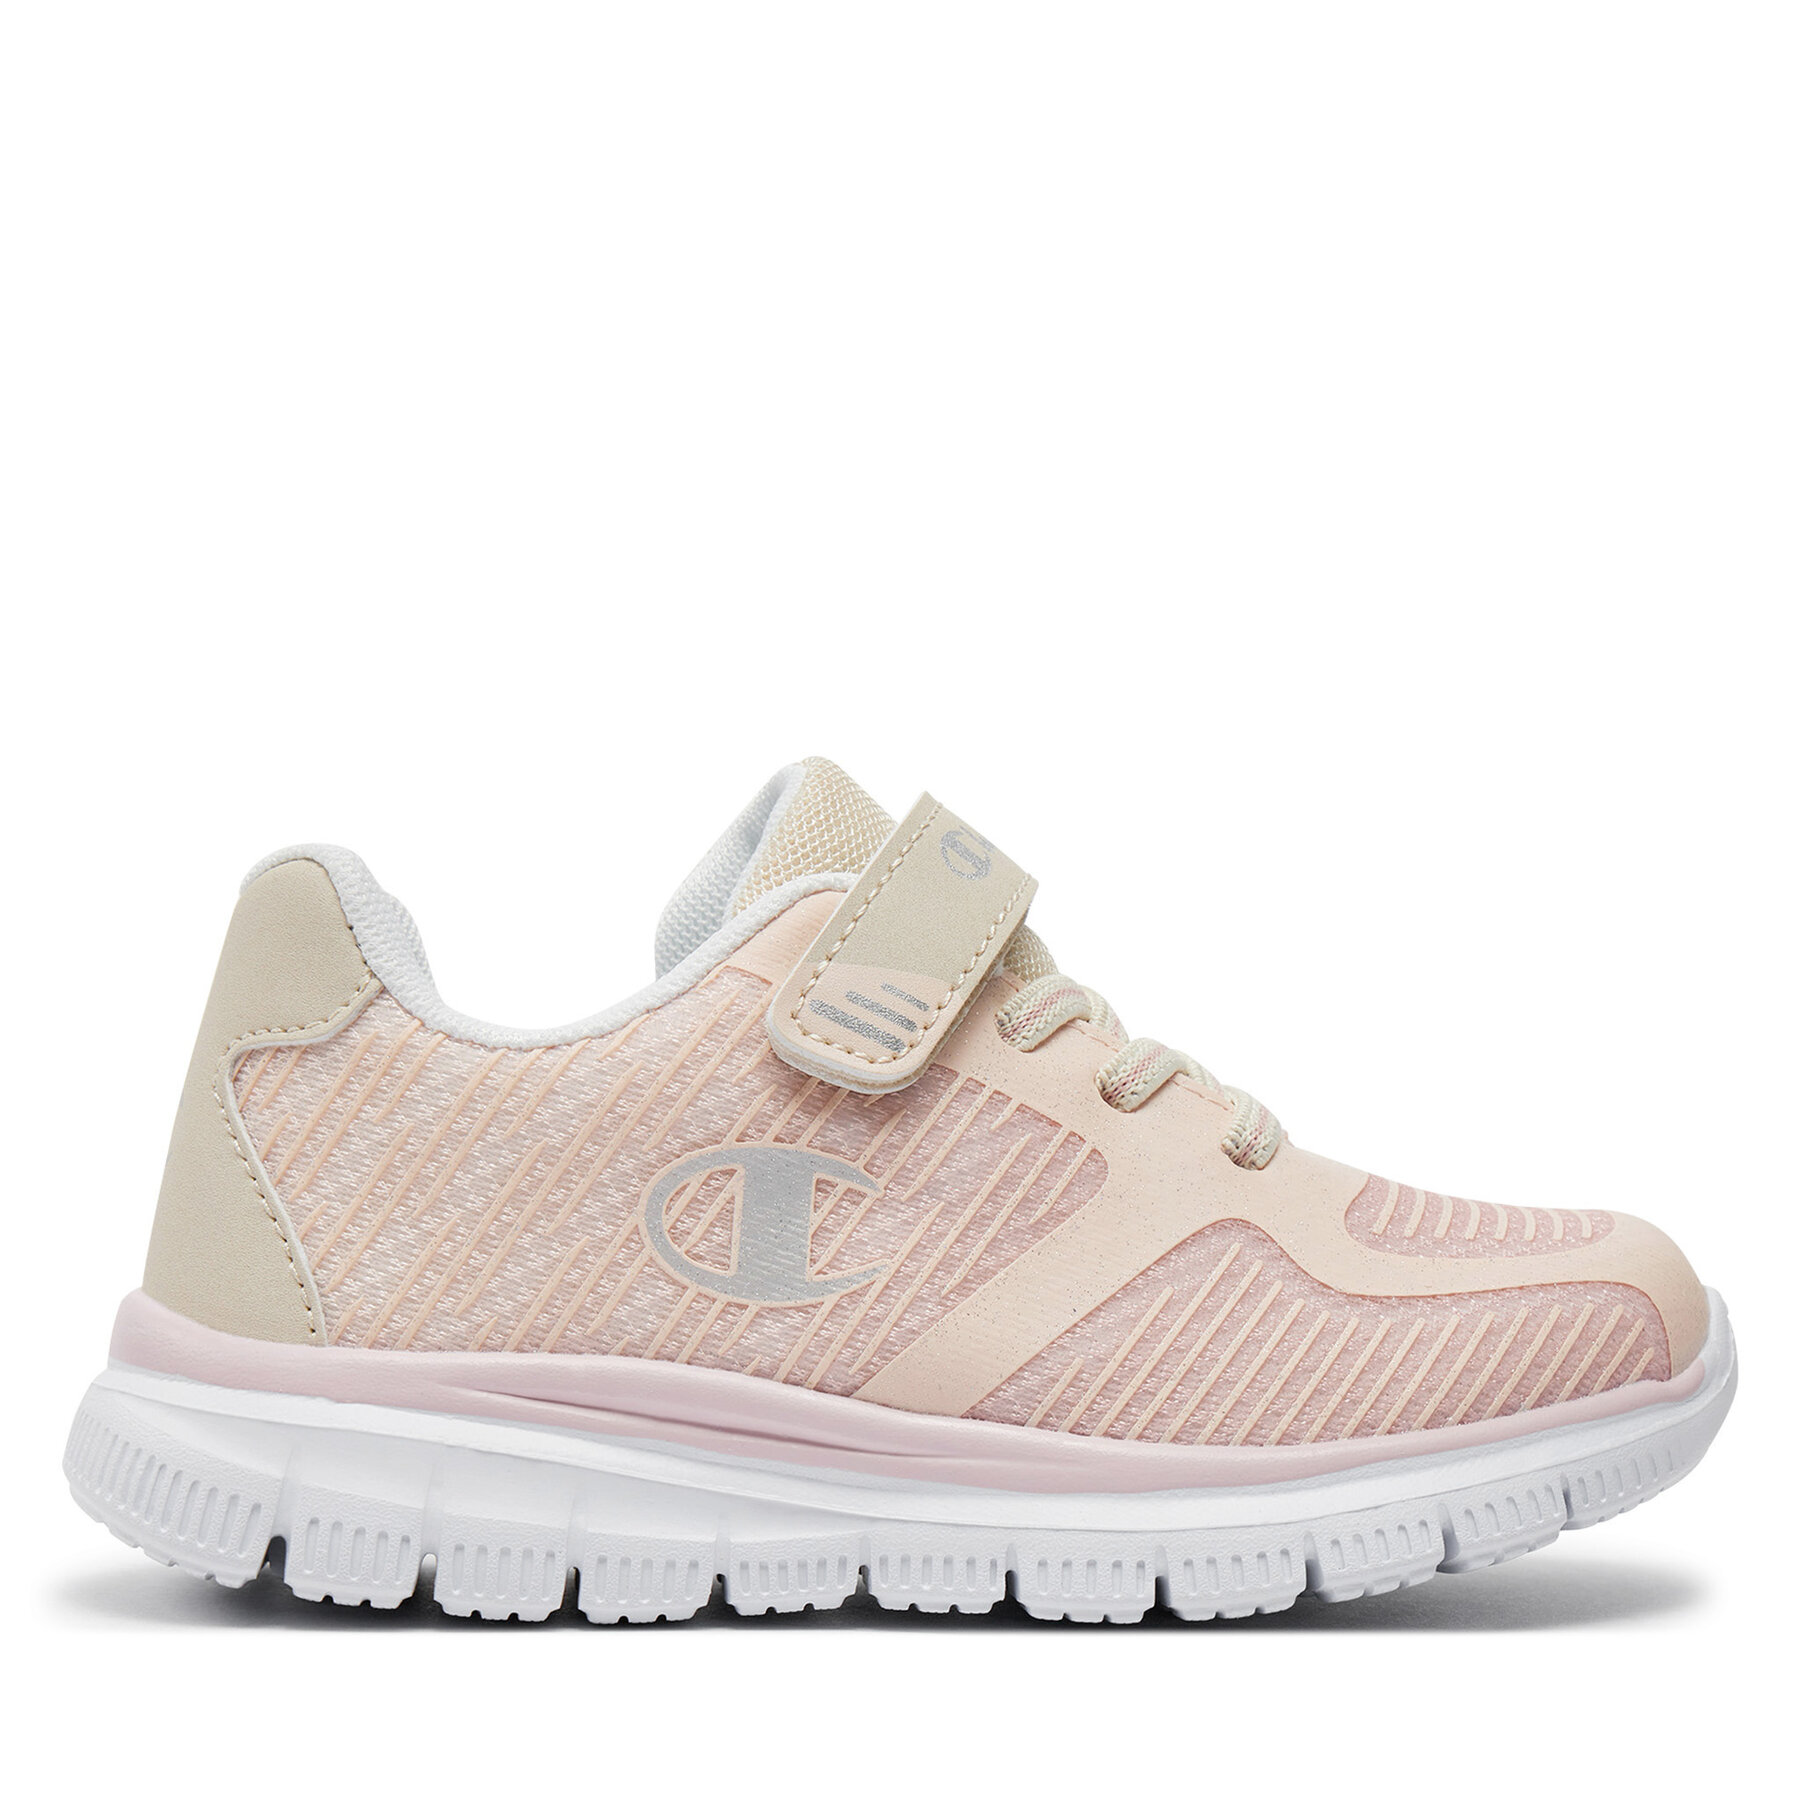 Sneakers Champion Runway G Ps Low Cut Shoe S32843-CHA-PS128 Pink/Silver von Champion